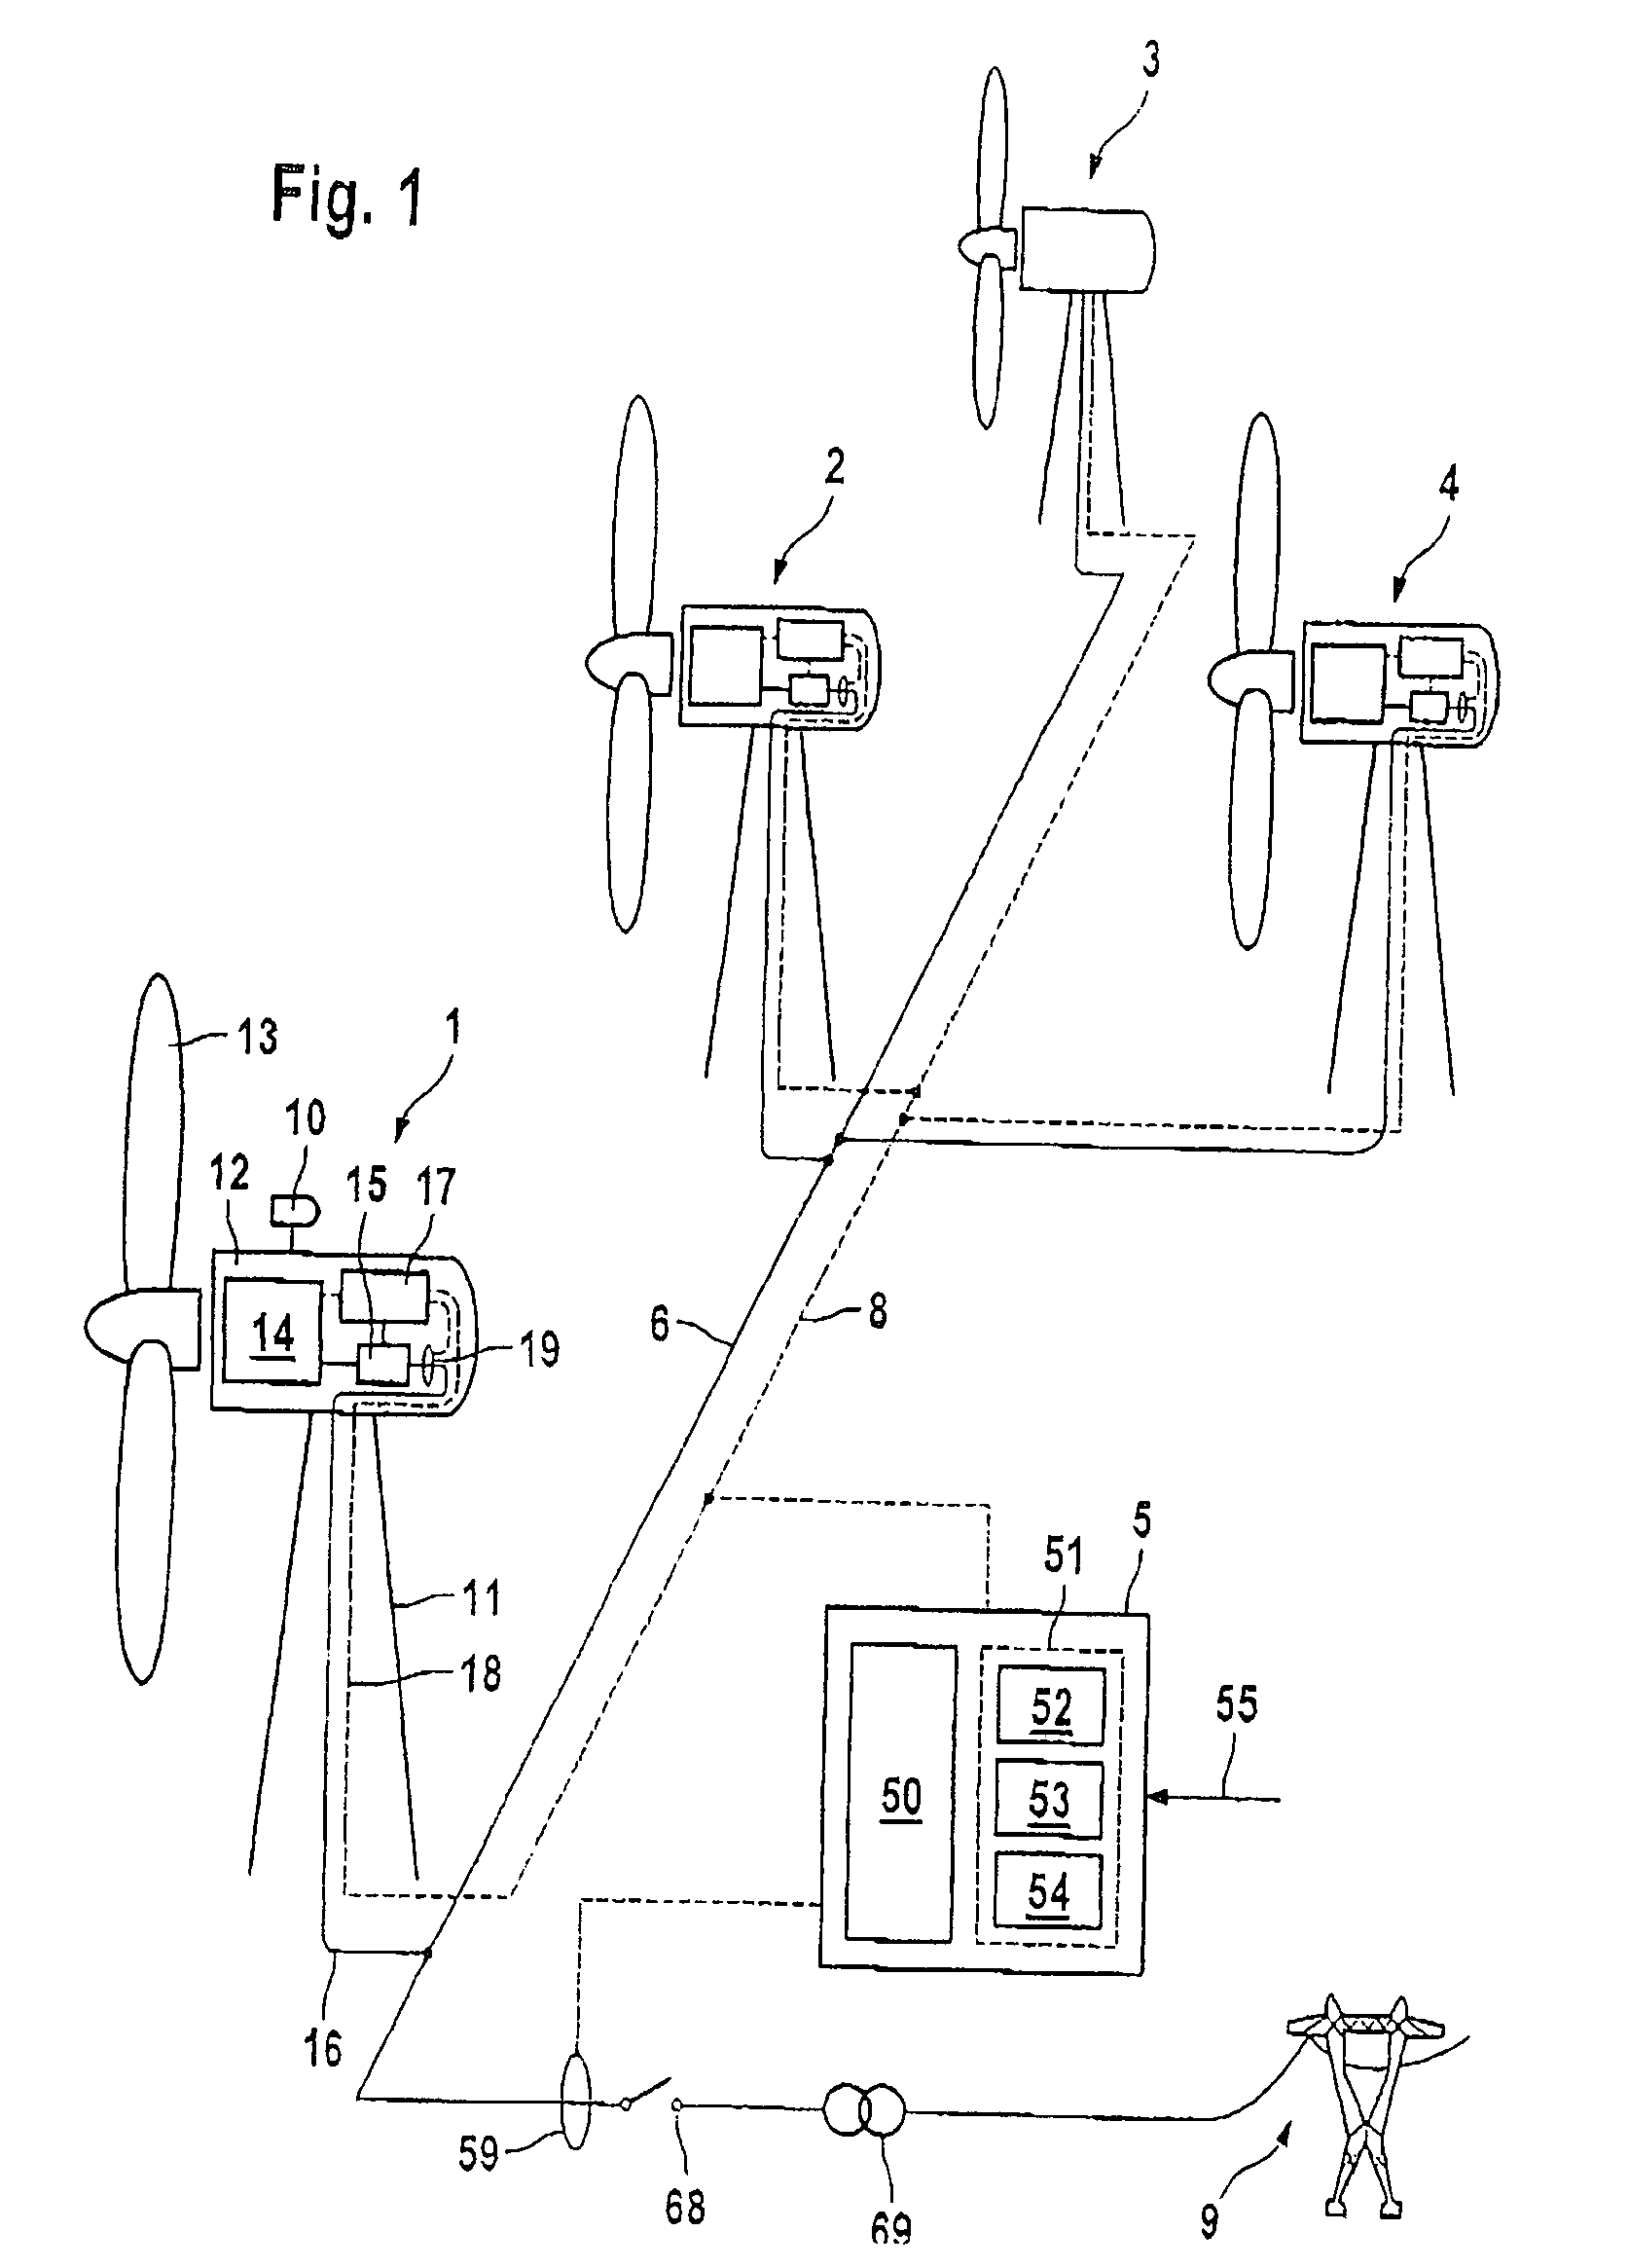 Method for optimizing the operation of wind farms